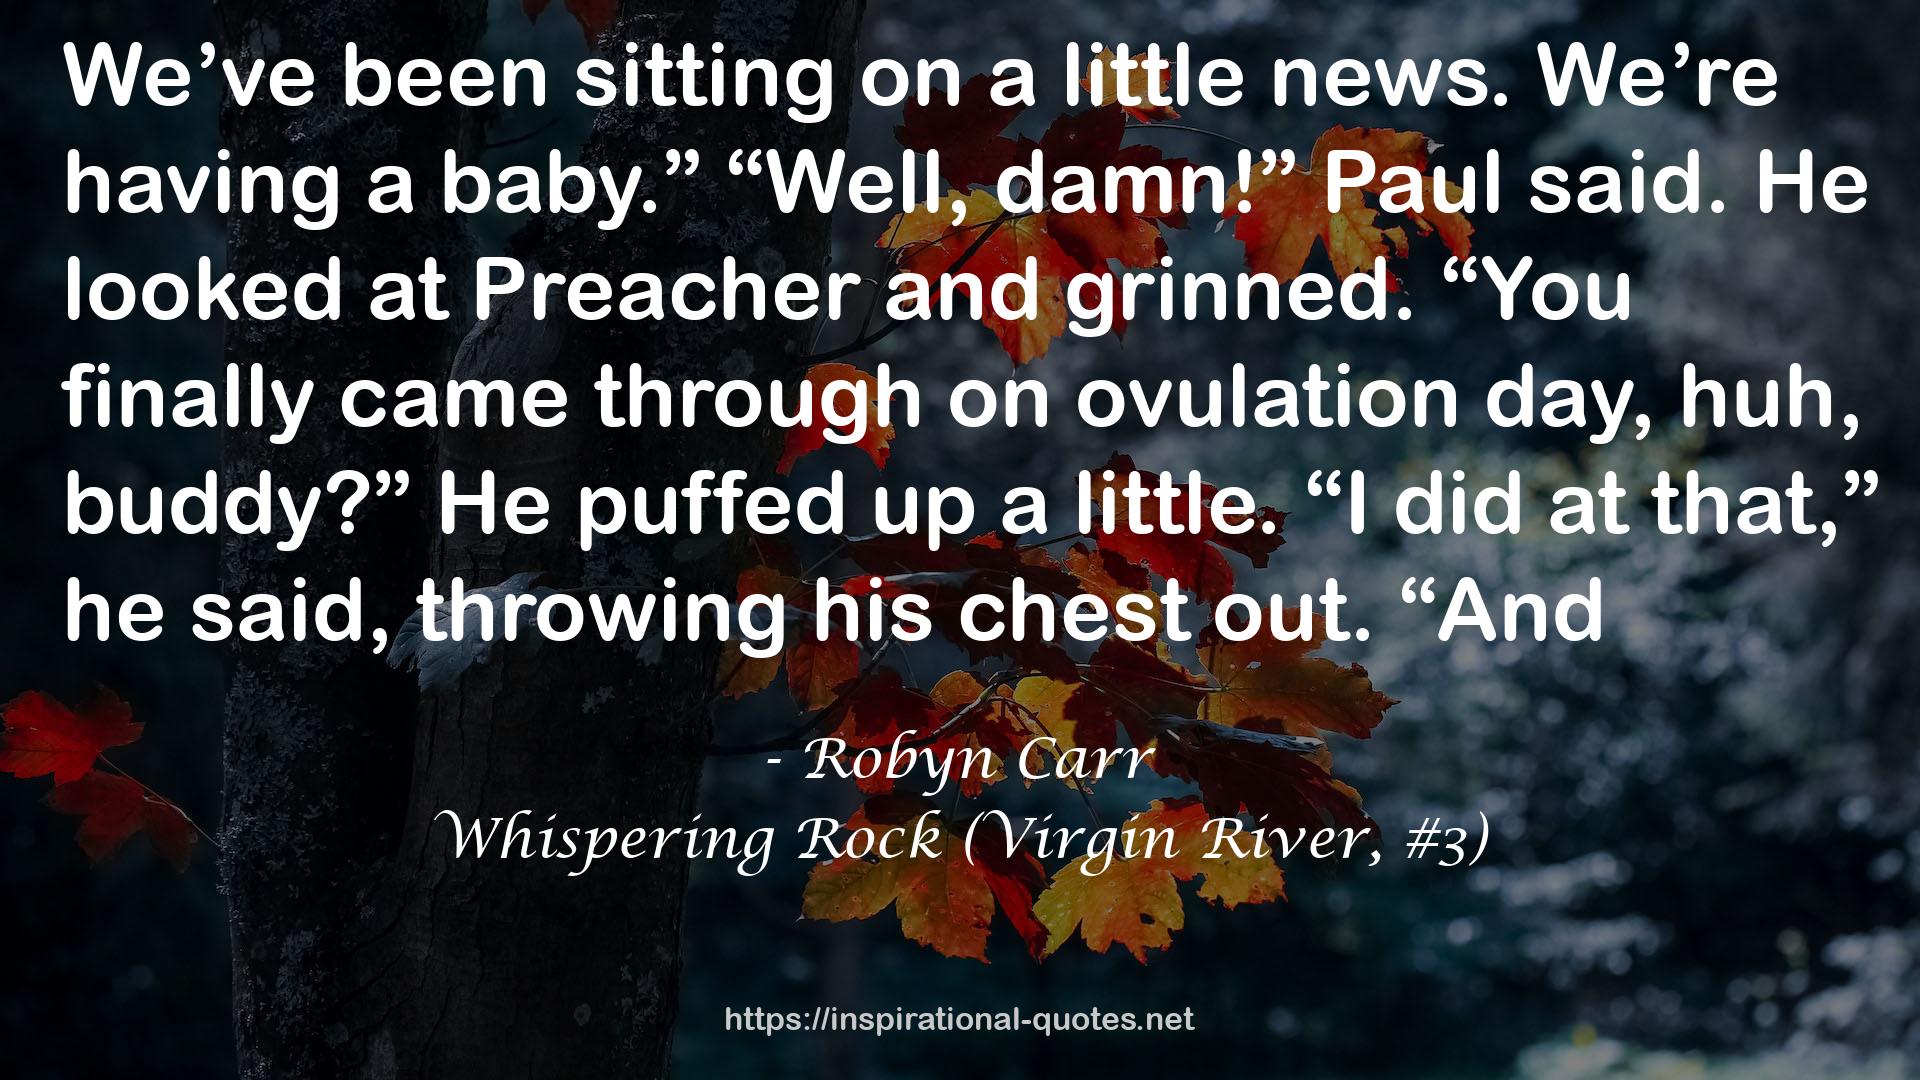 Whispering Rock (Virgin River, #3) QUOTES